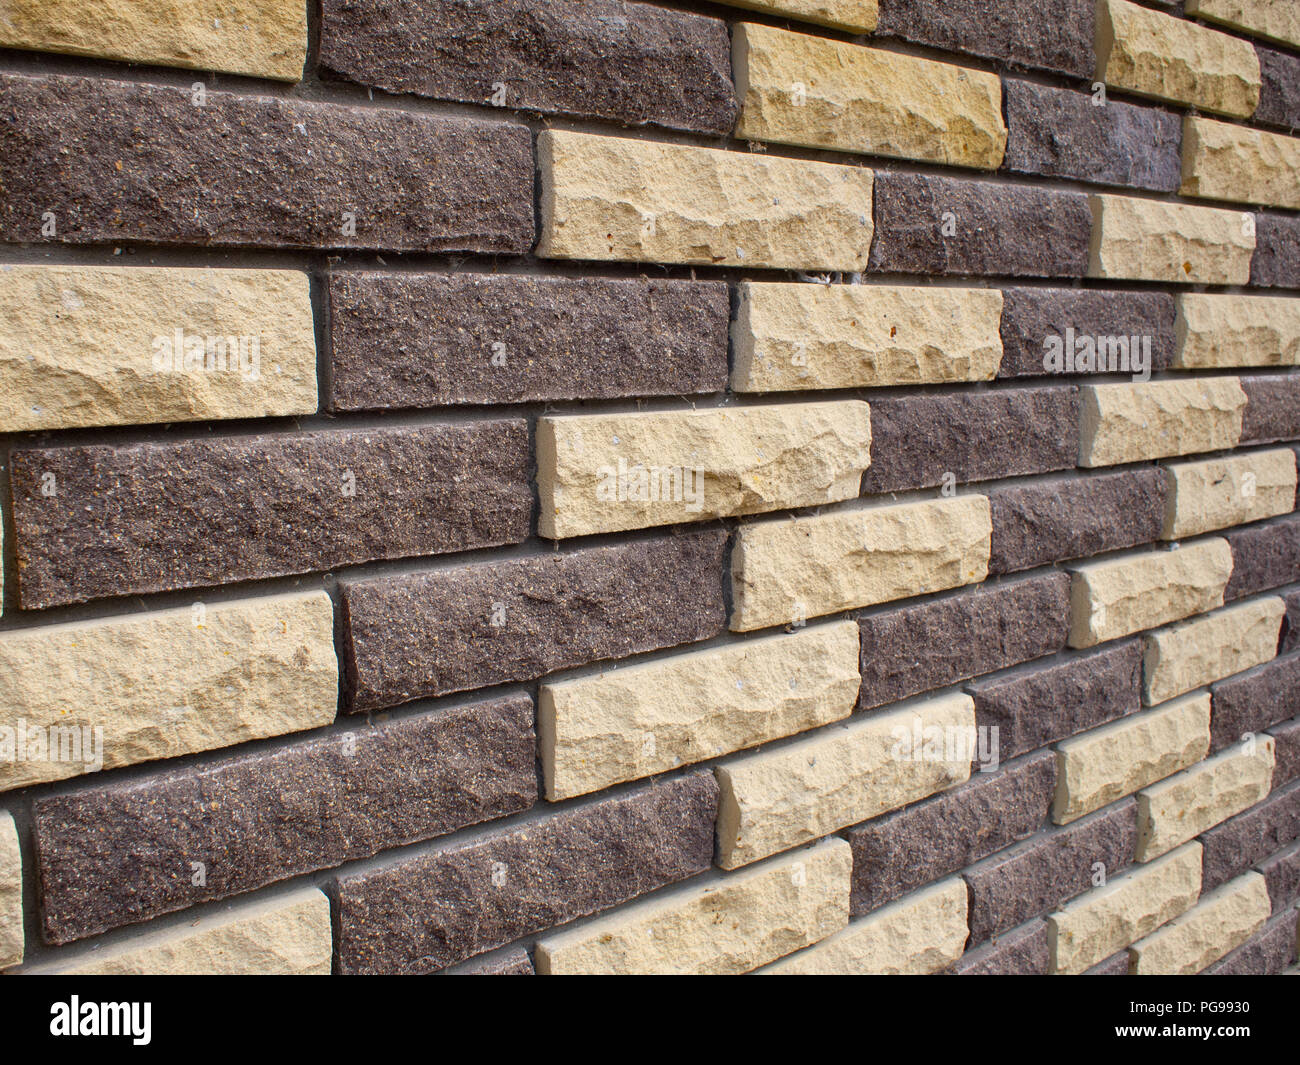 Diagonal view of a wall of yellow and brown bricks close-up as background Stock Photo